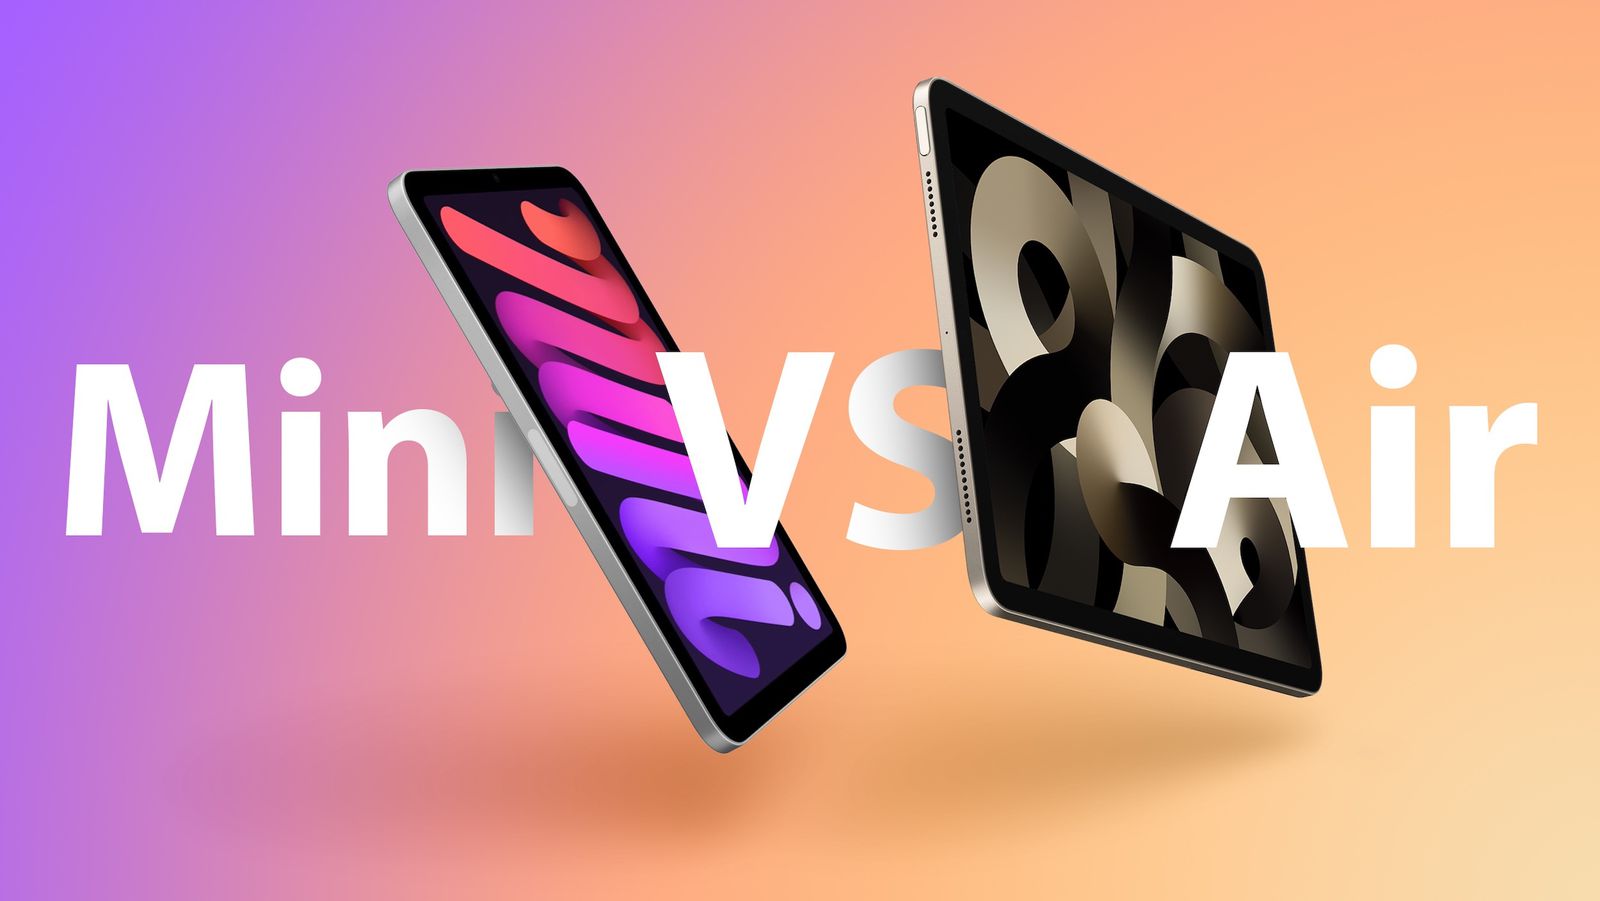 Apple's 2020 iPad vs. iPad Air: What's the Difference?